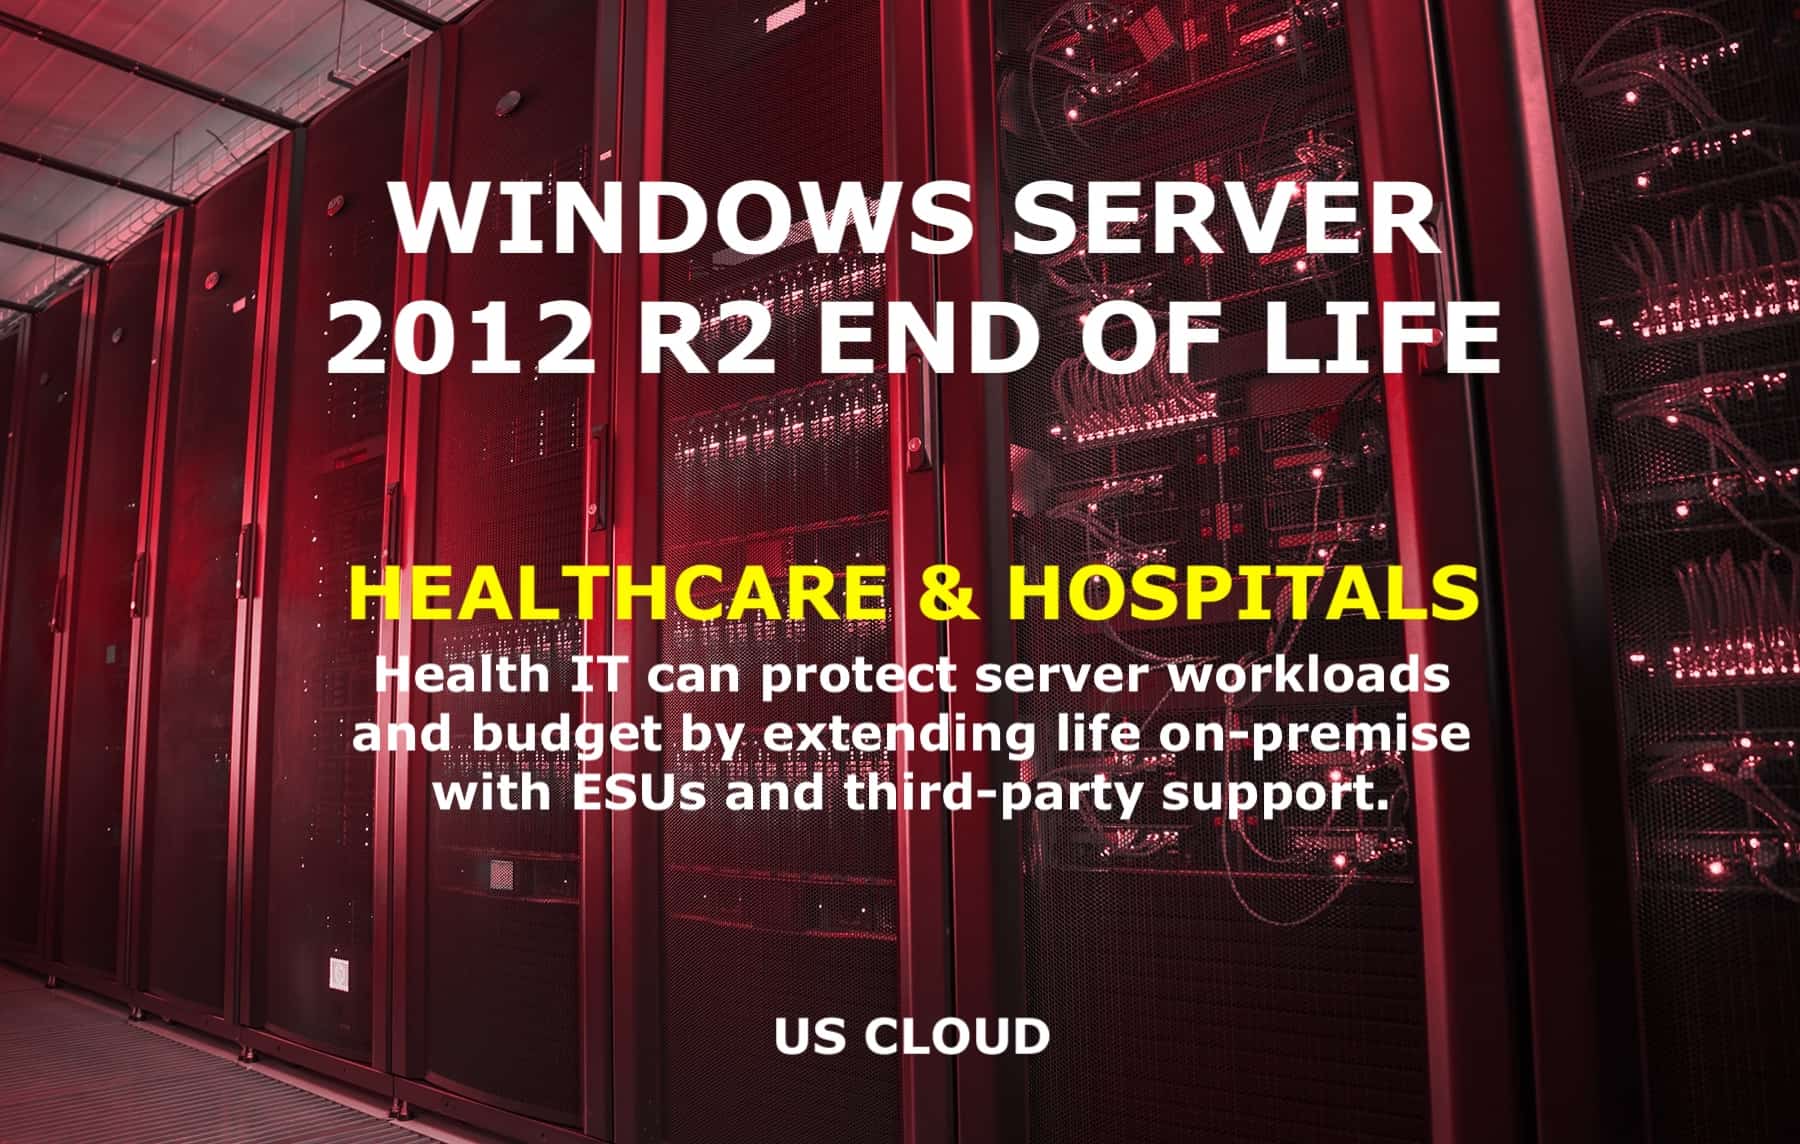 Windows Server 2012 R2 End of Life for Healthcare and Hospitals